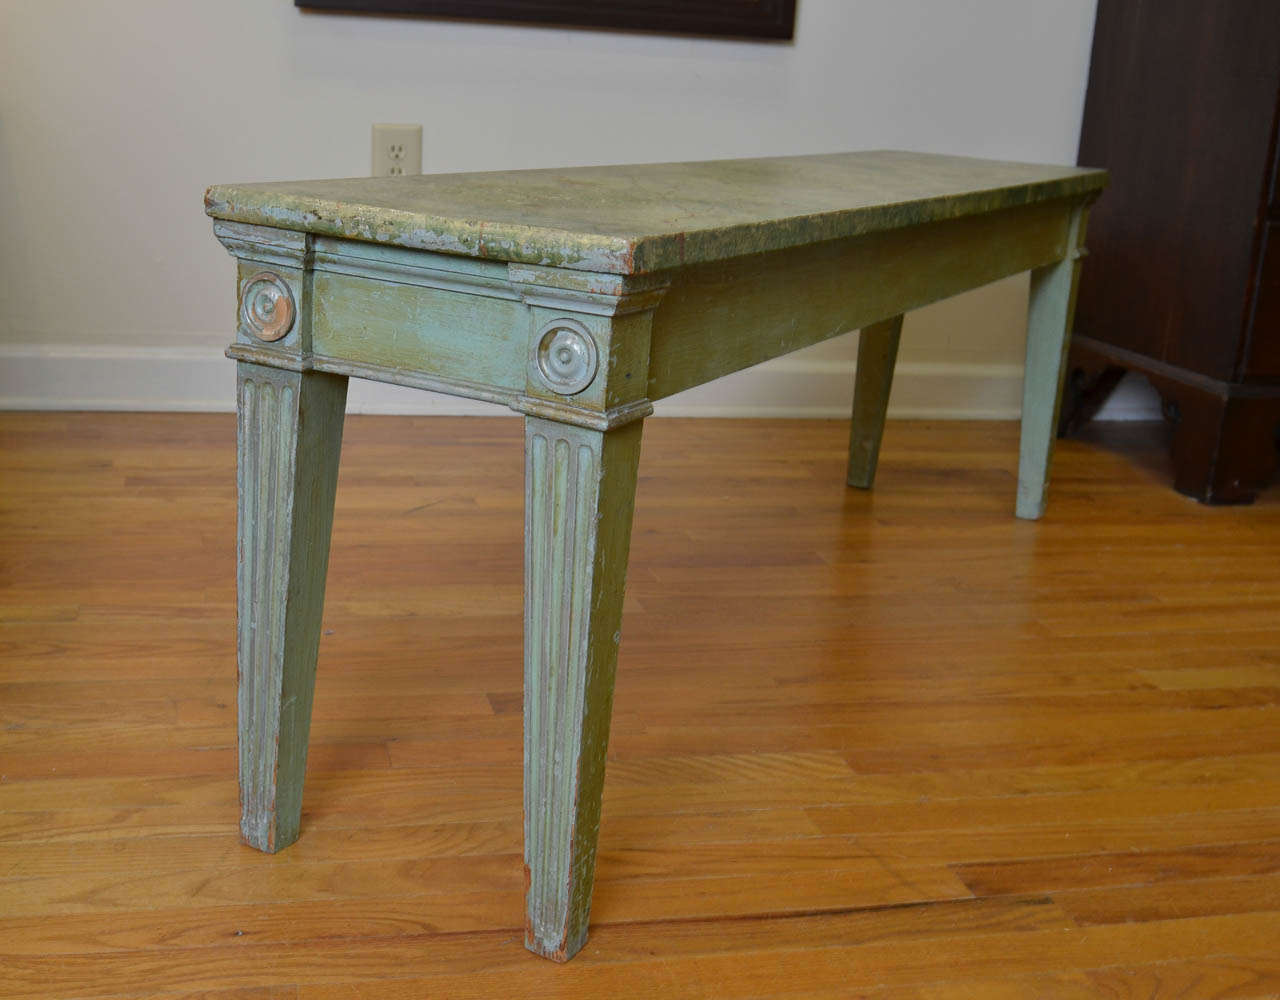 This is an English bench from the 1920's.  It has been faux painted in a lovely two tonal green style